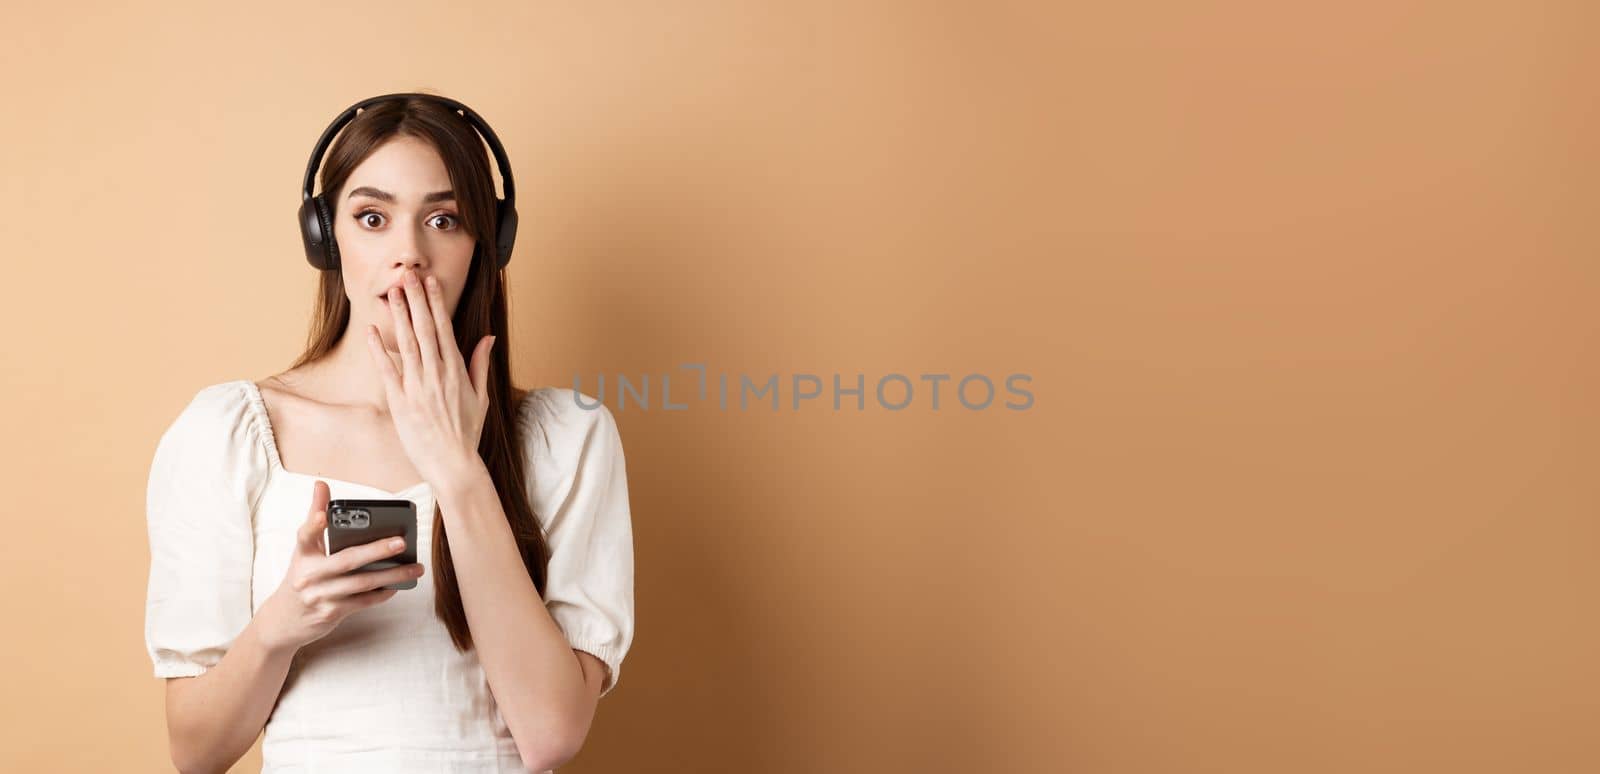 Surprised young woman gasping and covering mouth with hand, using wireless headphones to listen podcast or music, holding mobile phone, beige background.